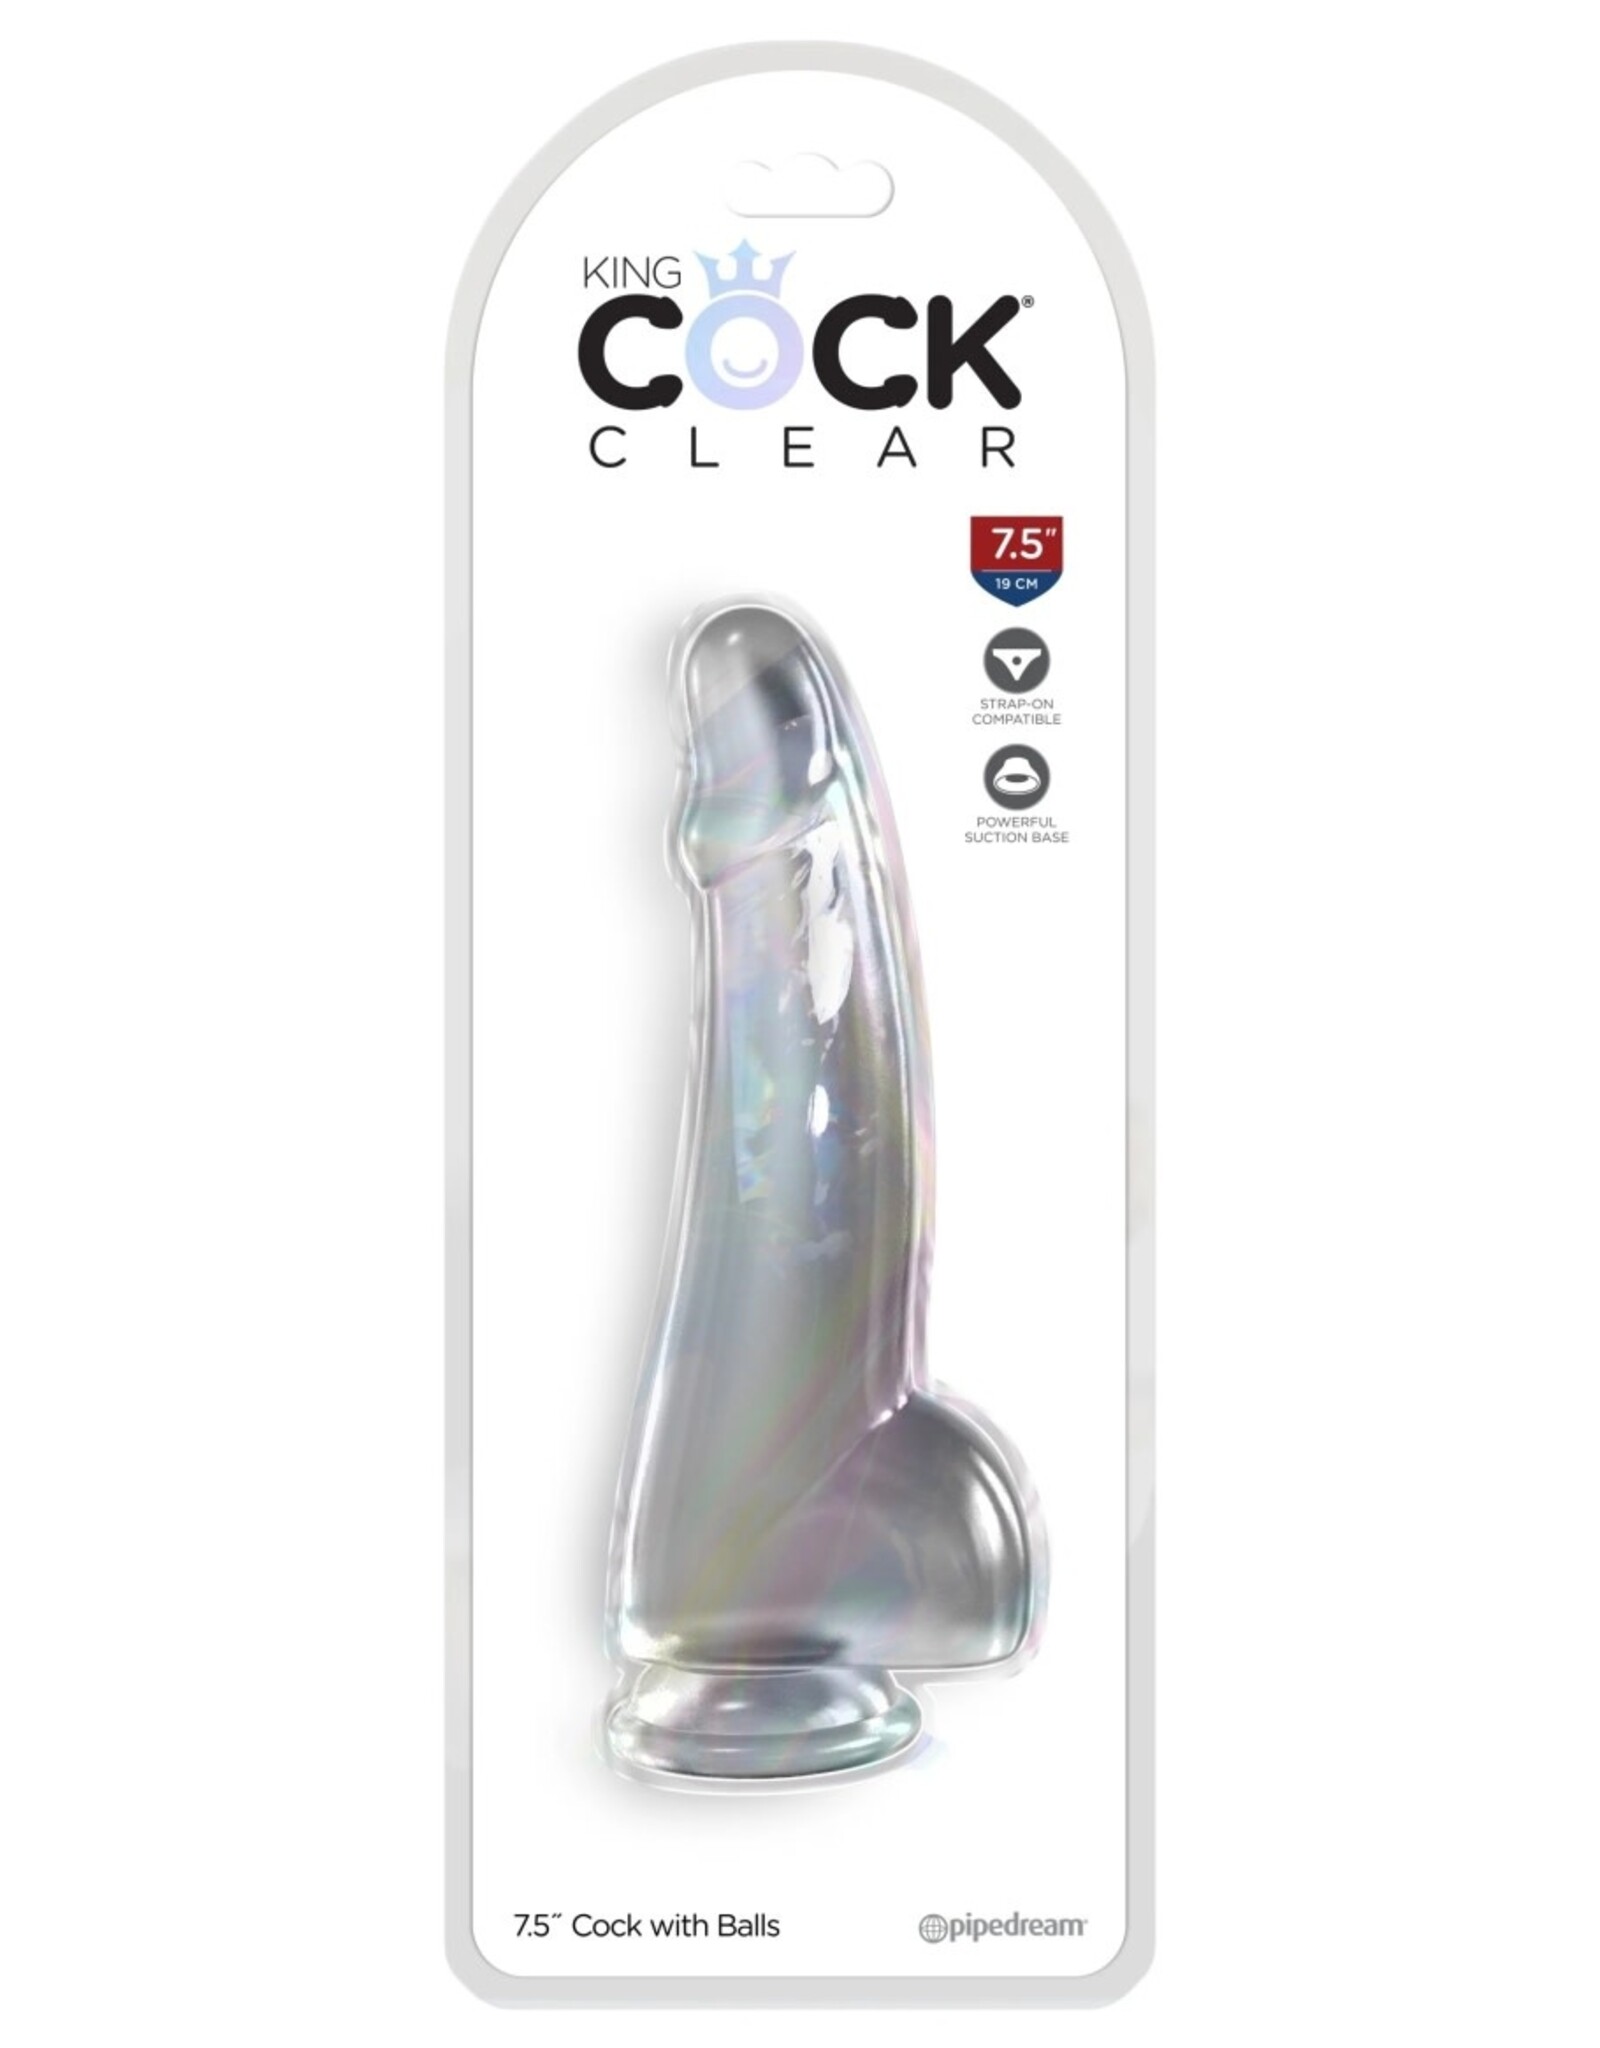 King Cock Elite 7.5" Cock with Balls